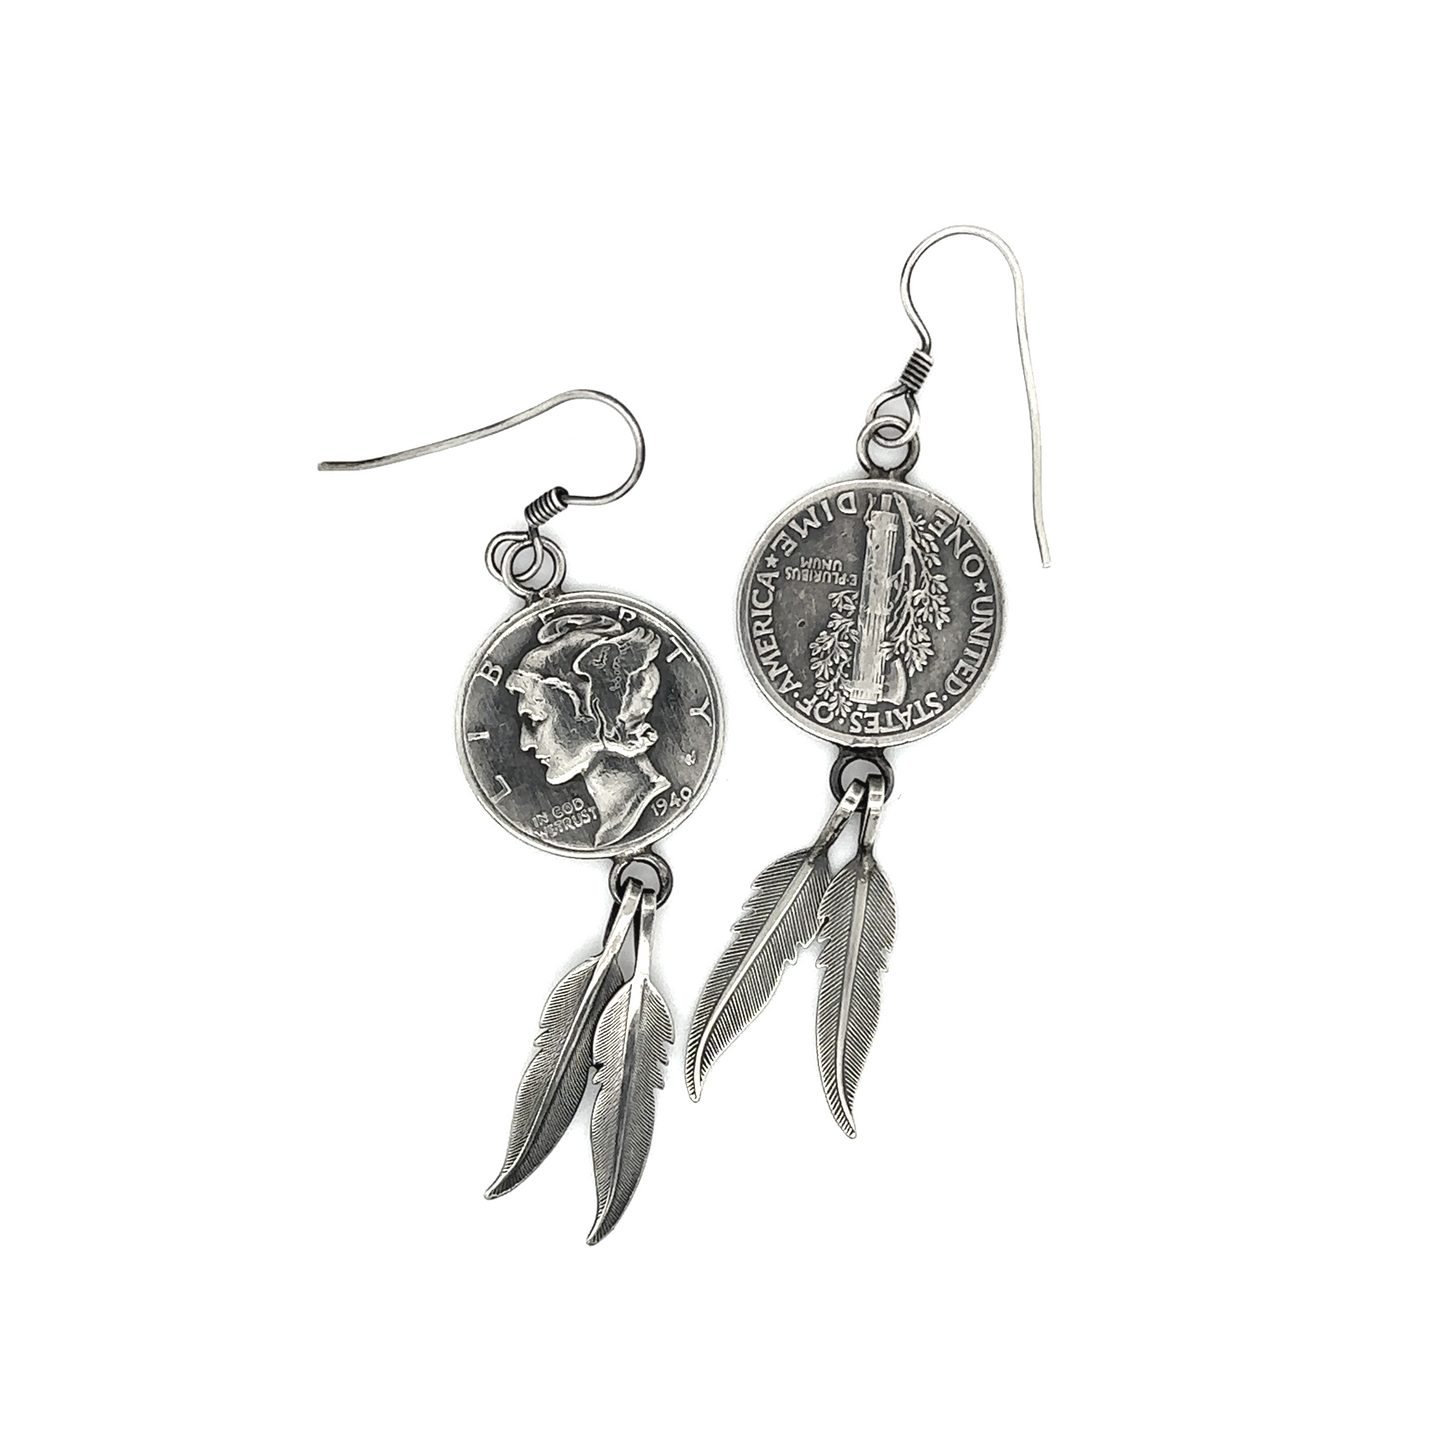 Native American Mercury Dime Earrings silver earrings with feathers by Super Silver.